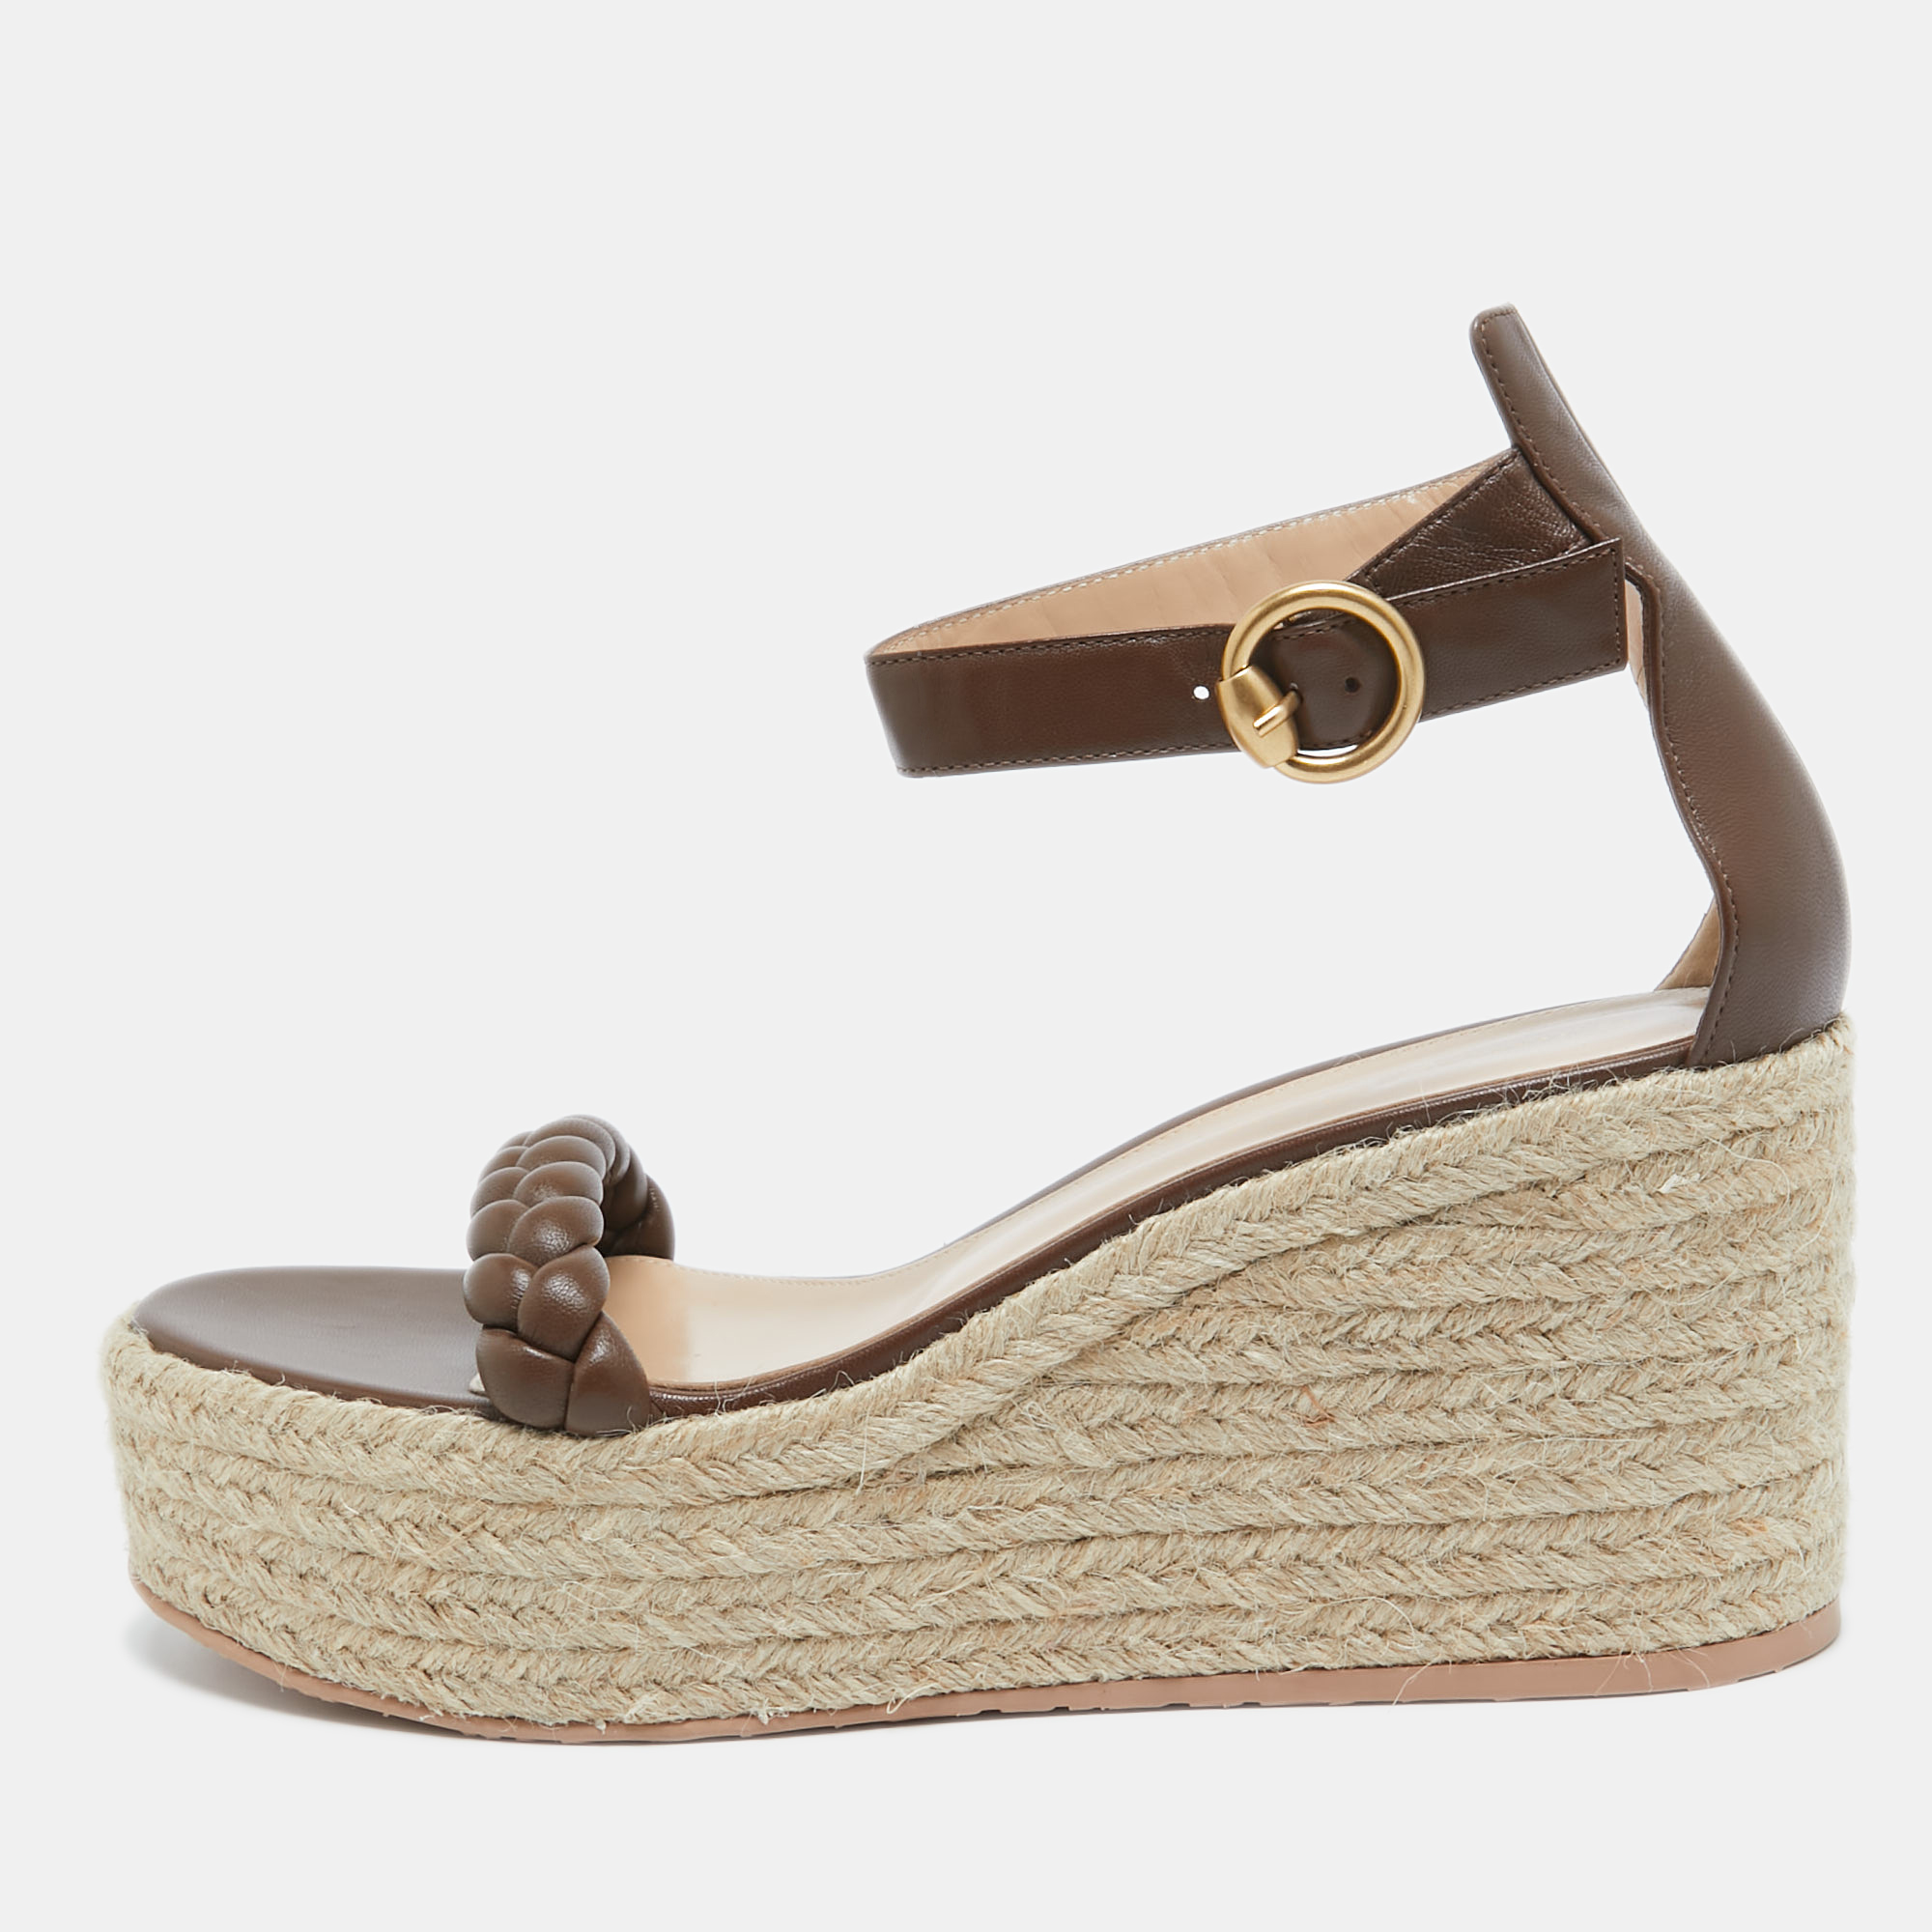 Gianvito rossi brown braided leather merida wedge espadrille platform ankle strap sandals size 40.5